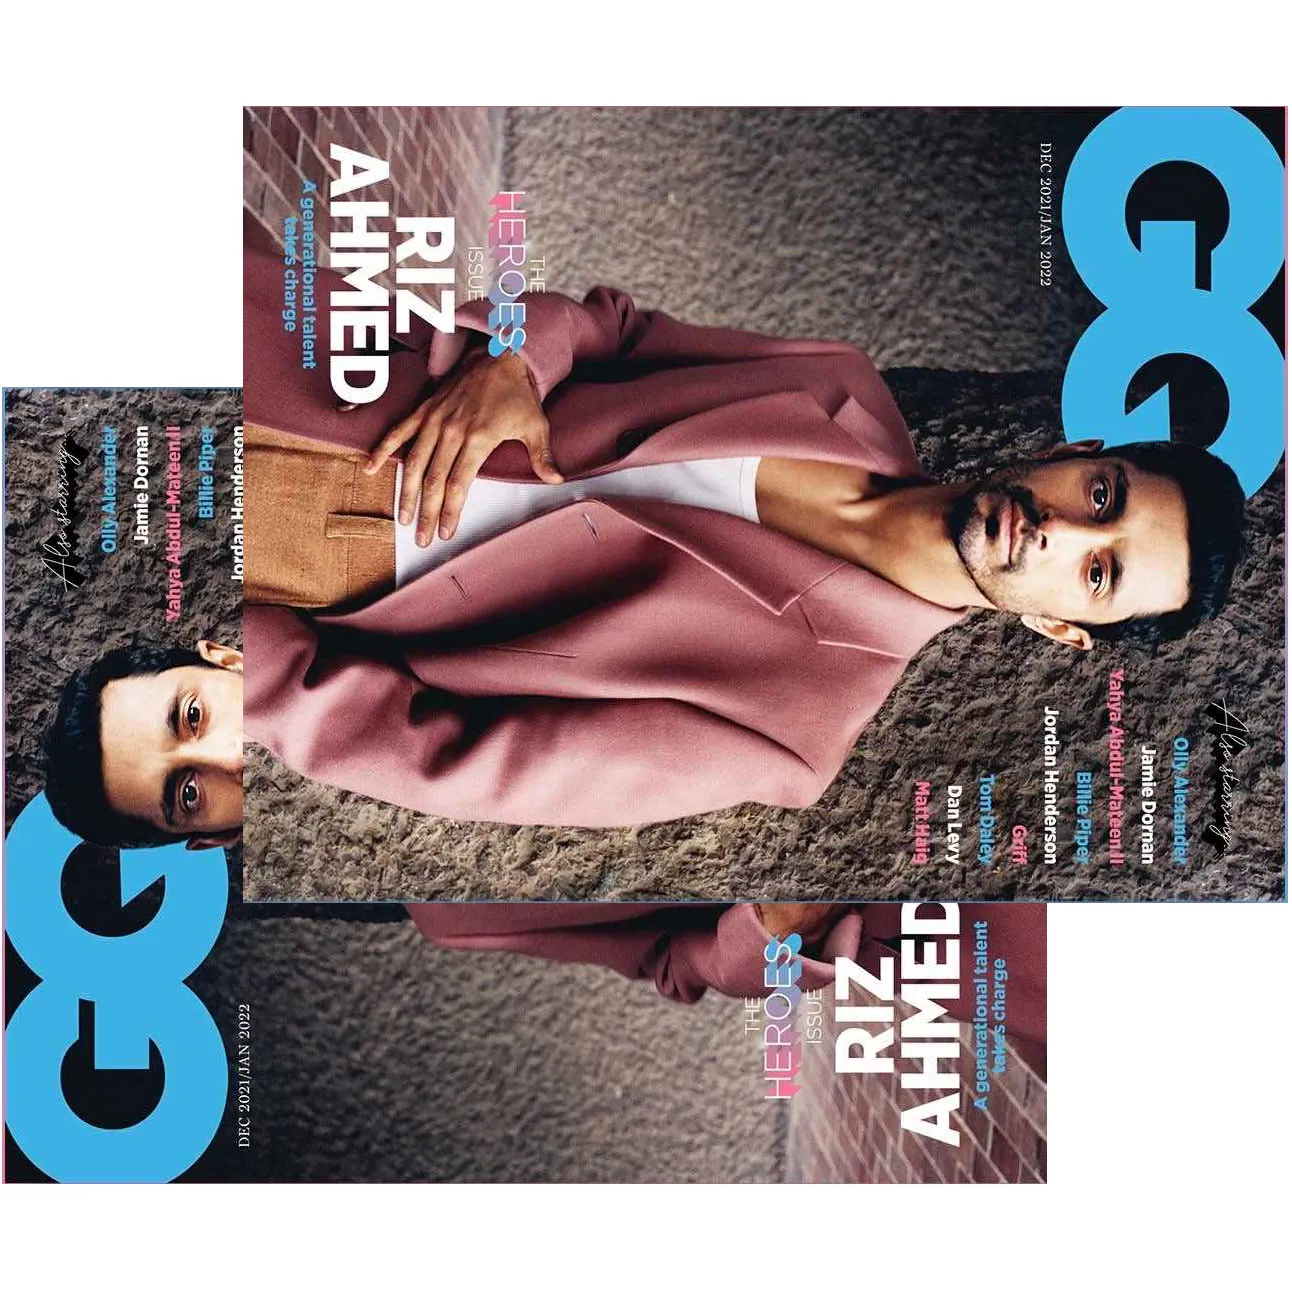 Free 1-Year Subscription To GQ Magazine